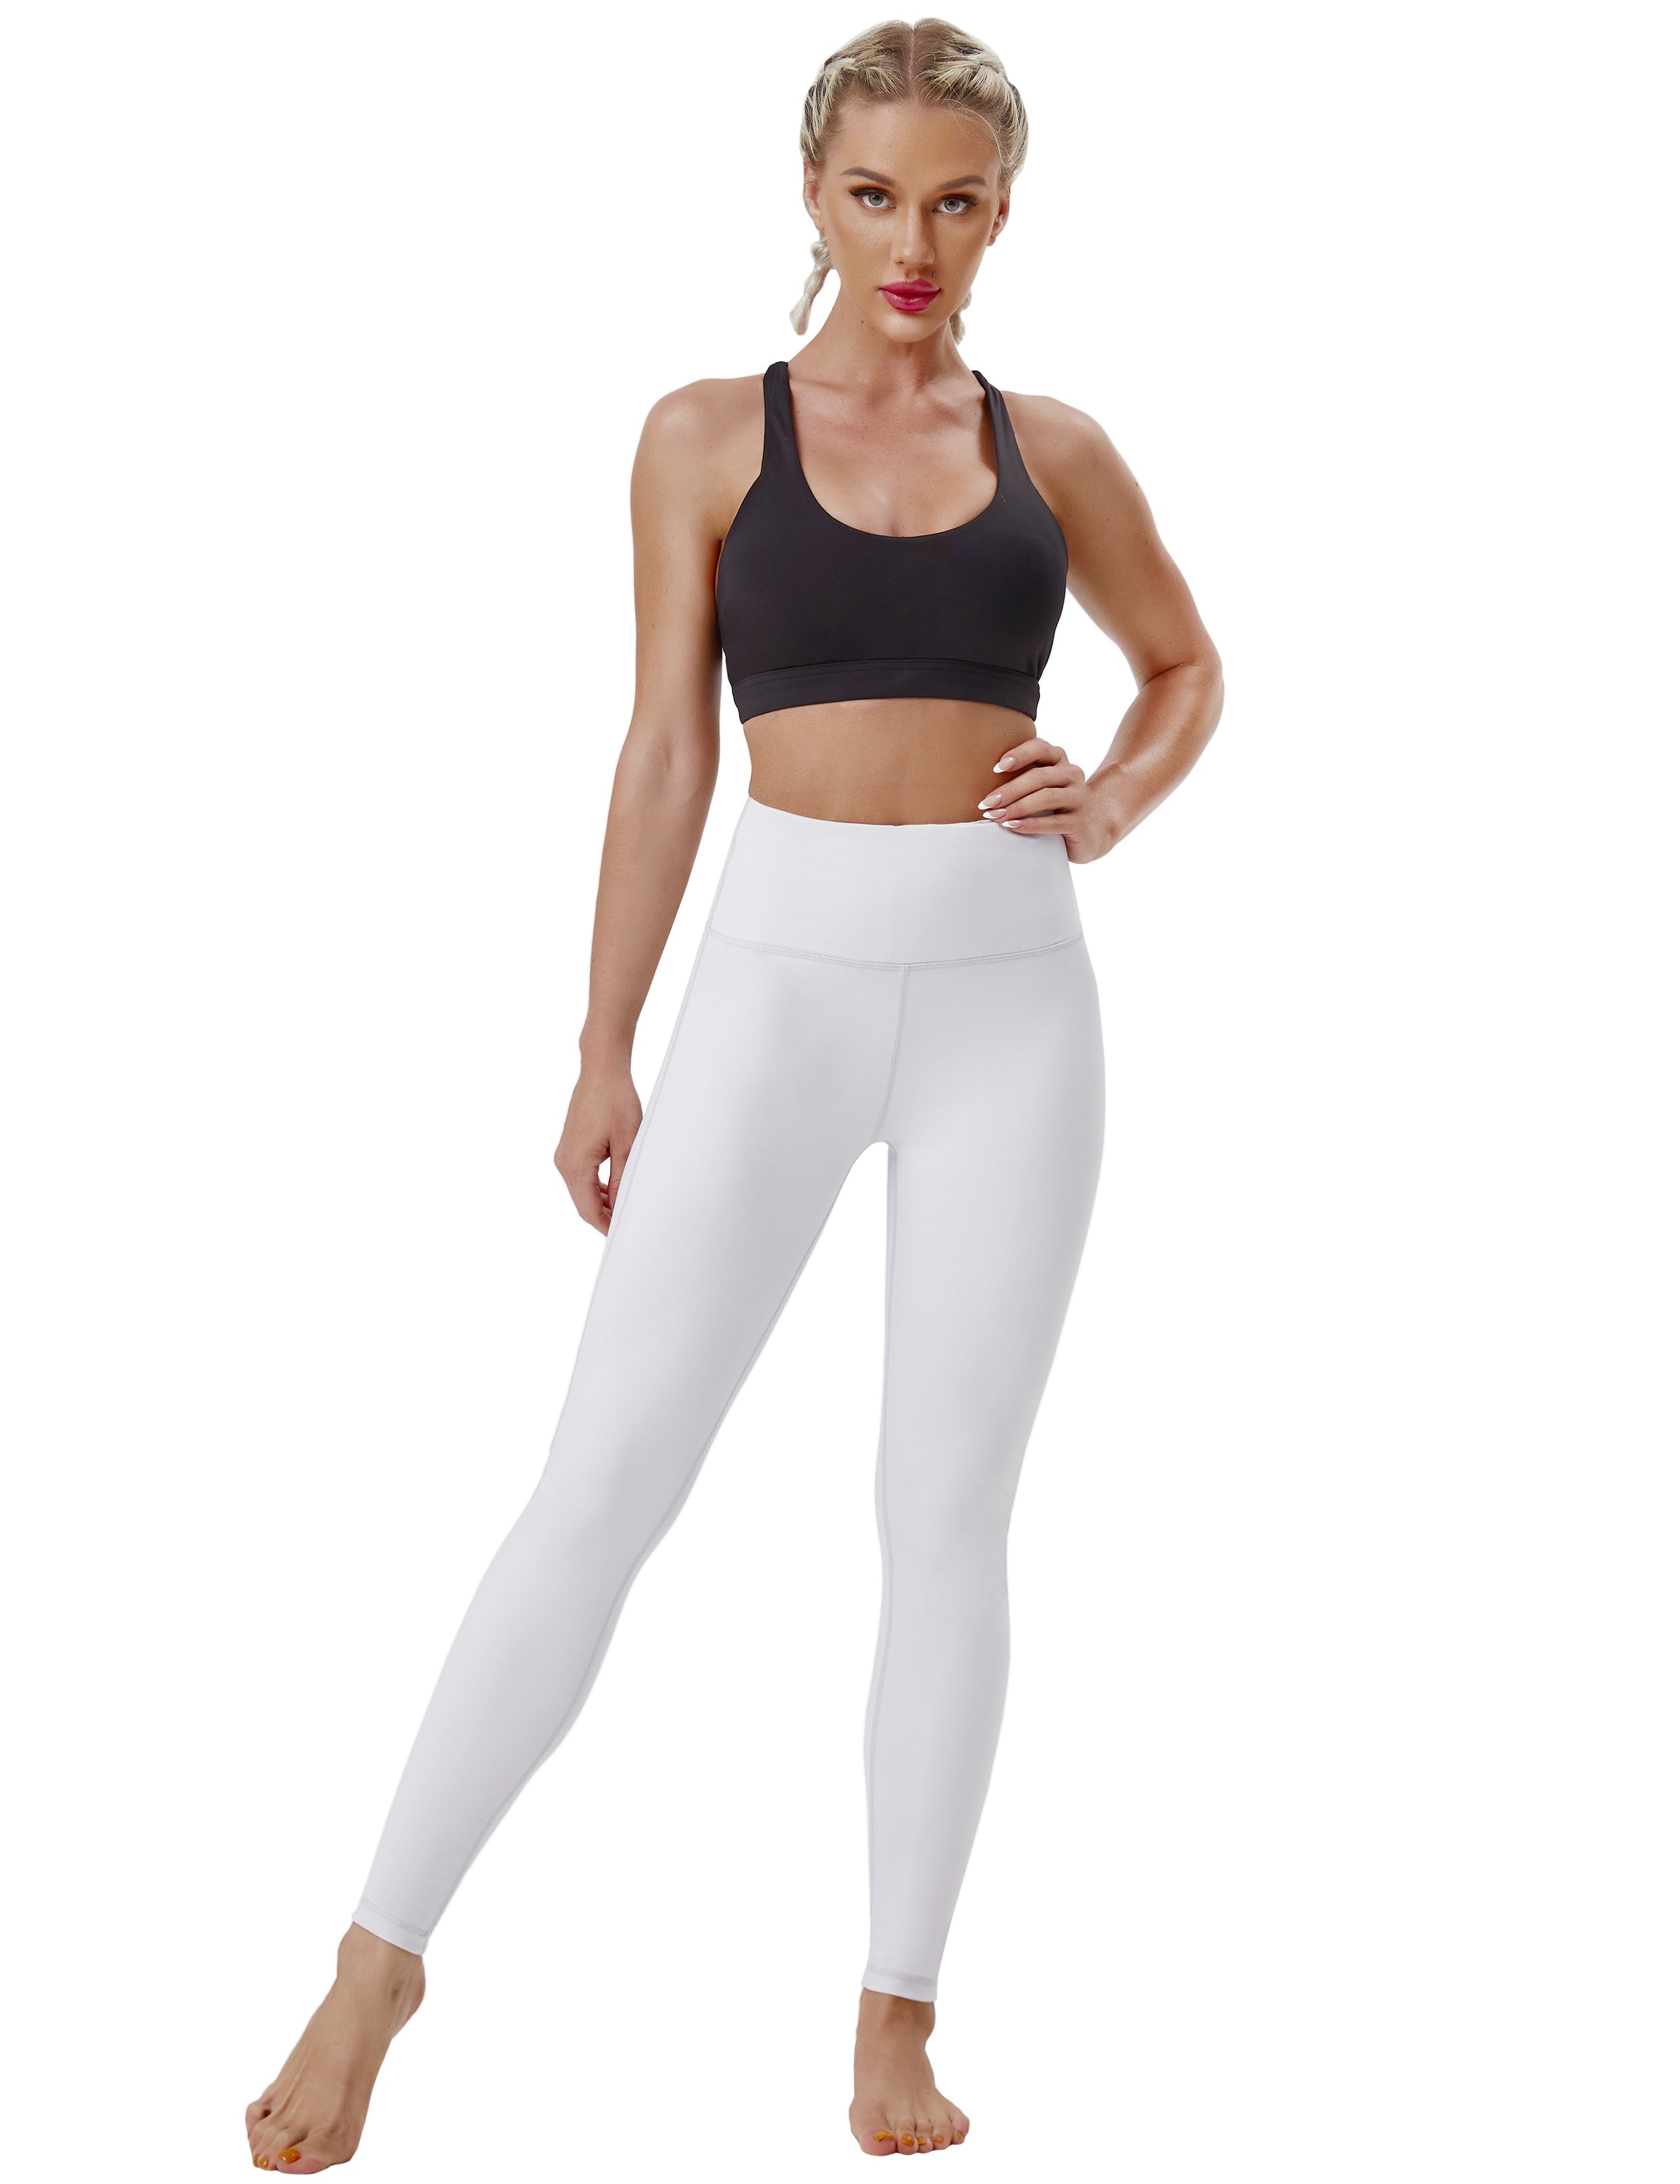 High Waist Side Line Jogging Pants lightgray Side Line is Make Your Legs Look Longer and Thinner 75%Nylon/25%Spandex Fabric doesn't attract lint easily 4-way stretch No see-through Moisture-wicking Tummy control Inner pocket Two lengths